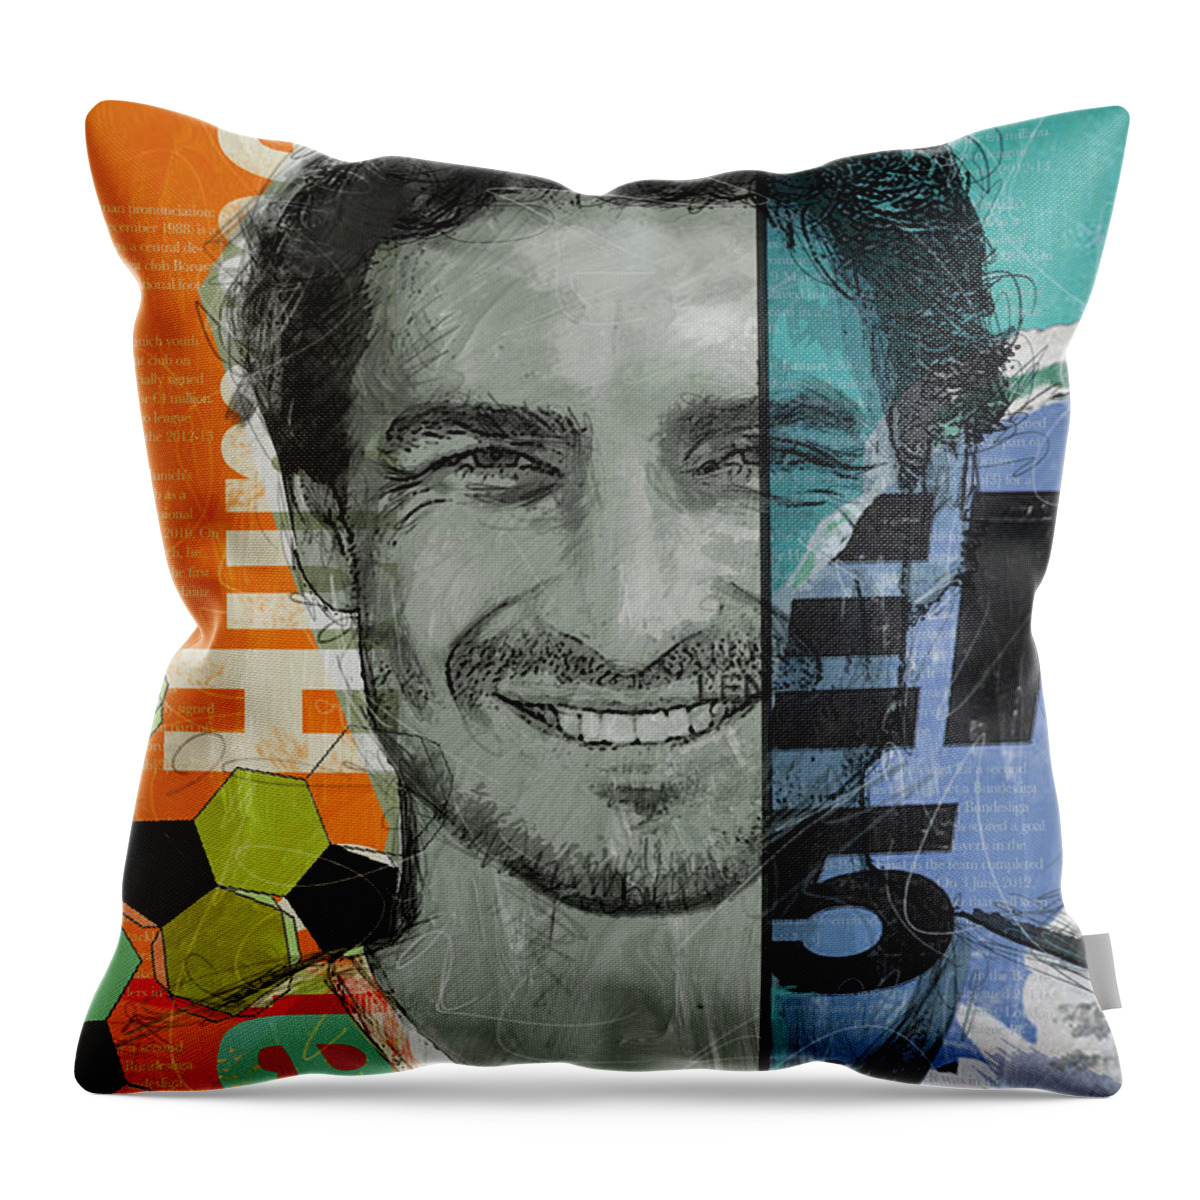 Cristiano Ronaldo Throw Pillow featuring the painting Mats Hummels - B by Corporate Art Task Force